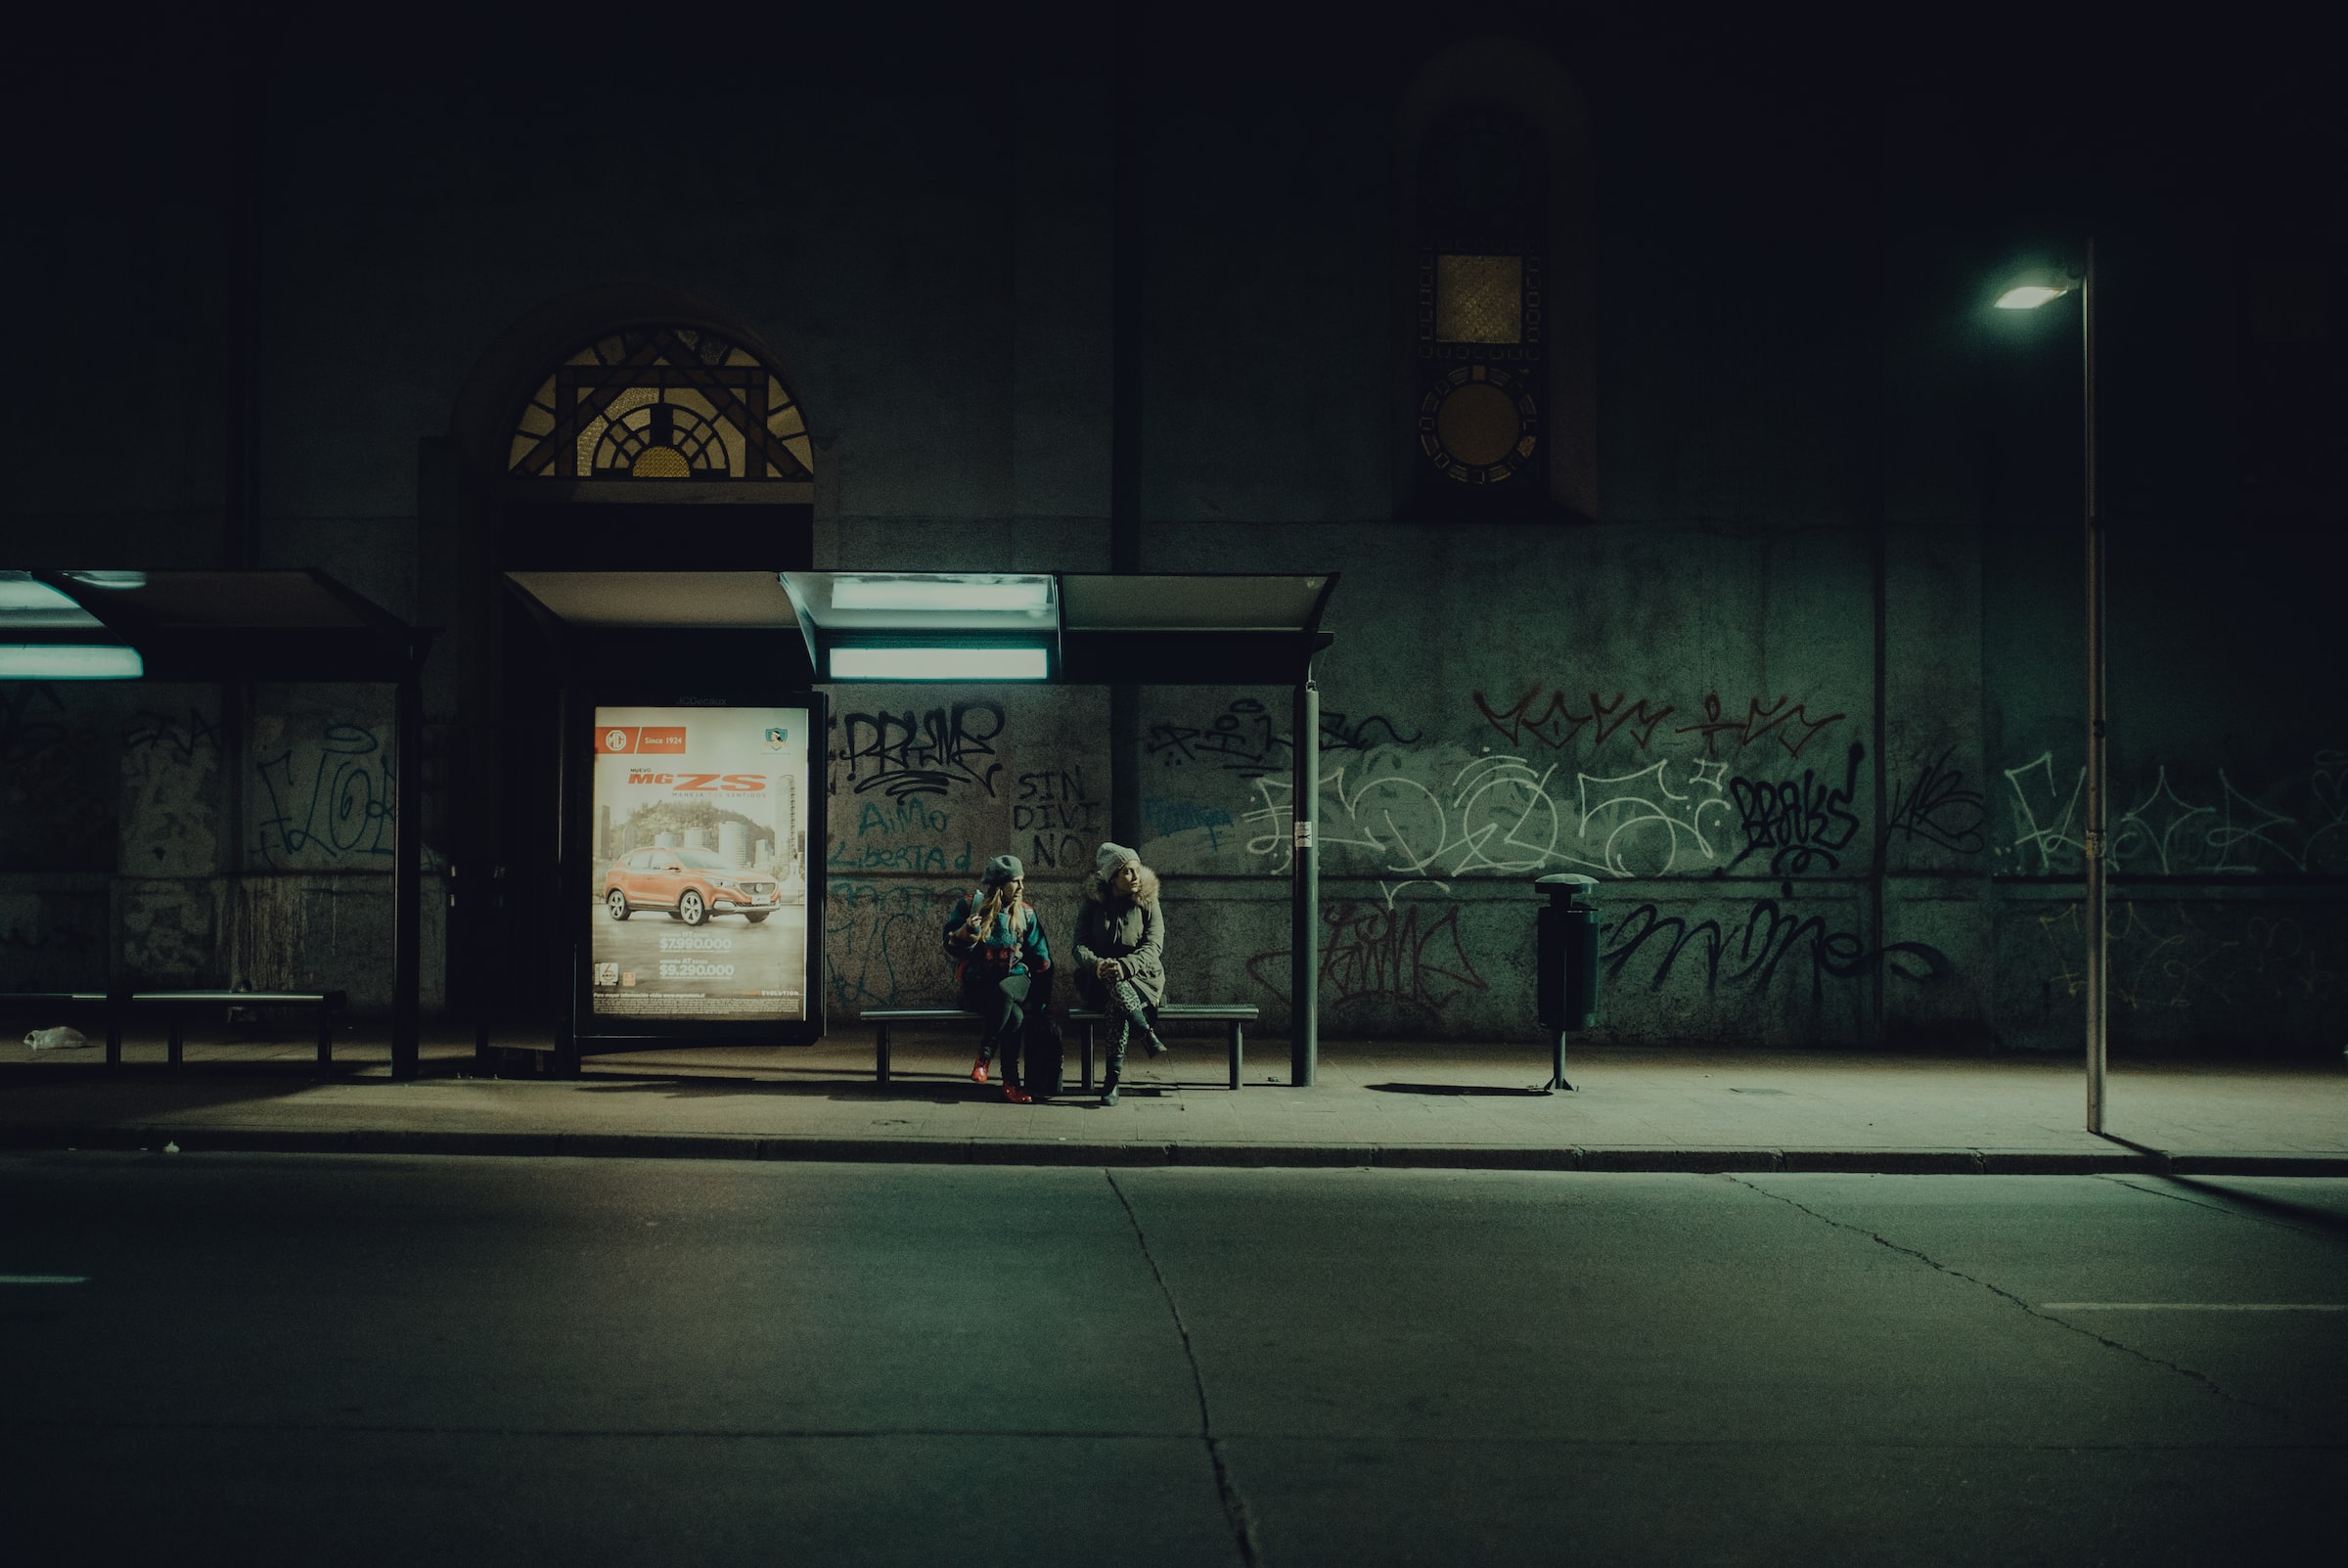 Two people sit at a bus stop at night